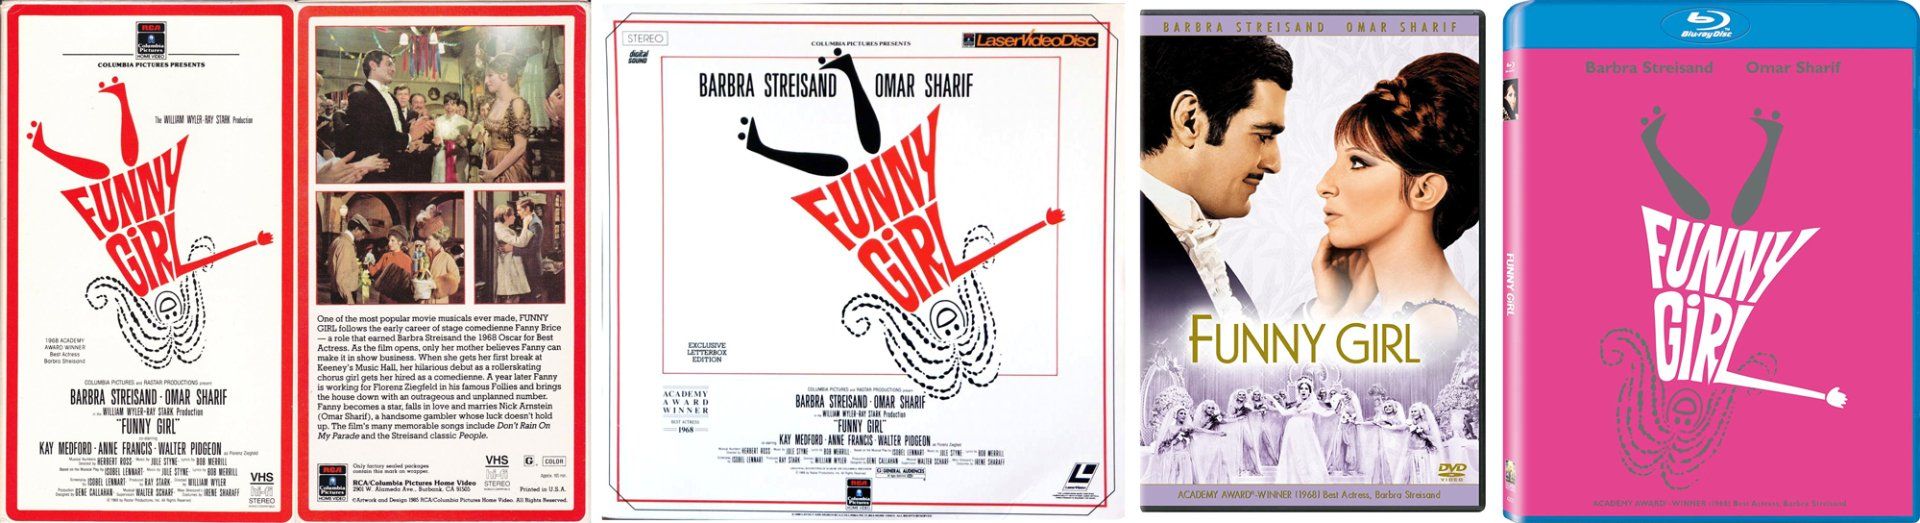 Photos of all the covers of the versions of Funny Girl: VHS, laserdisc, DVD and Blu-ray